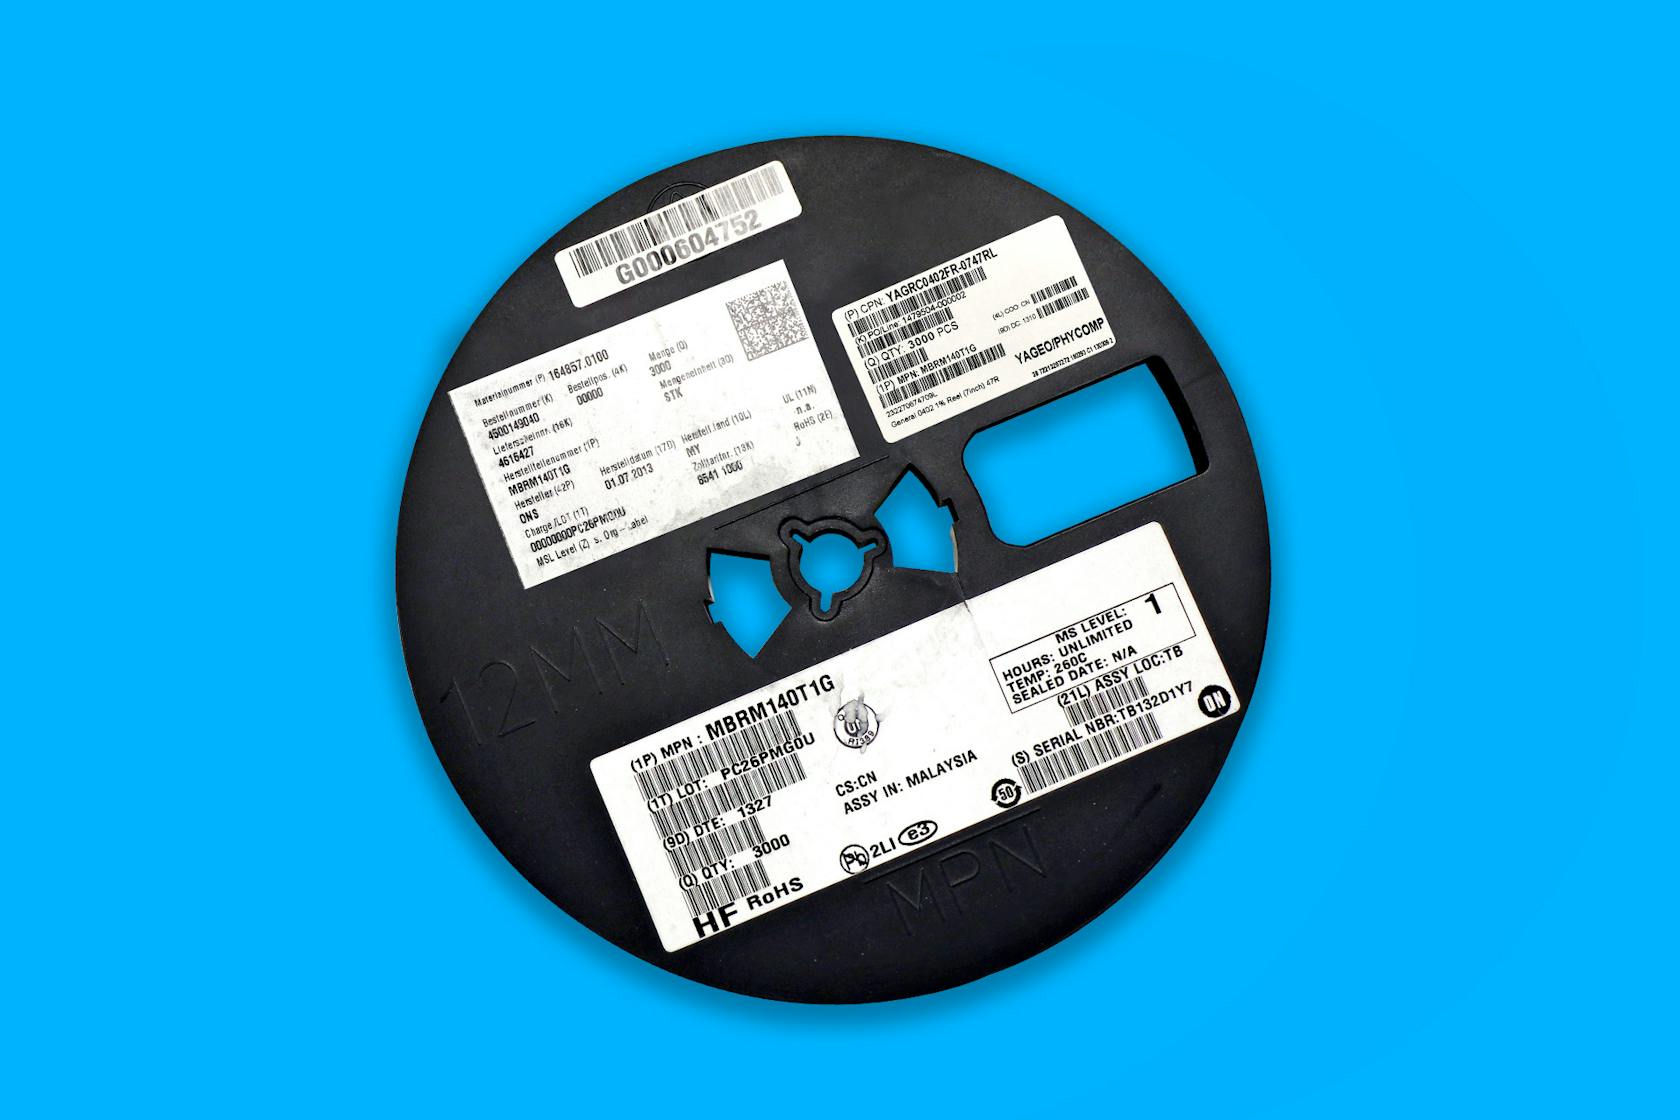 SMD reel with stickers: All multicodes must be correctly recorded during SMD reel detection.